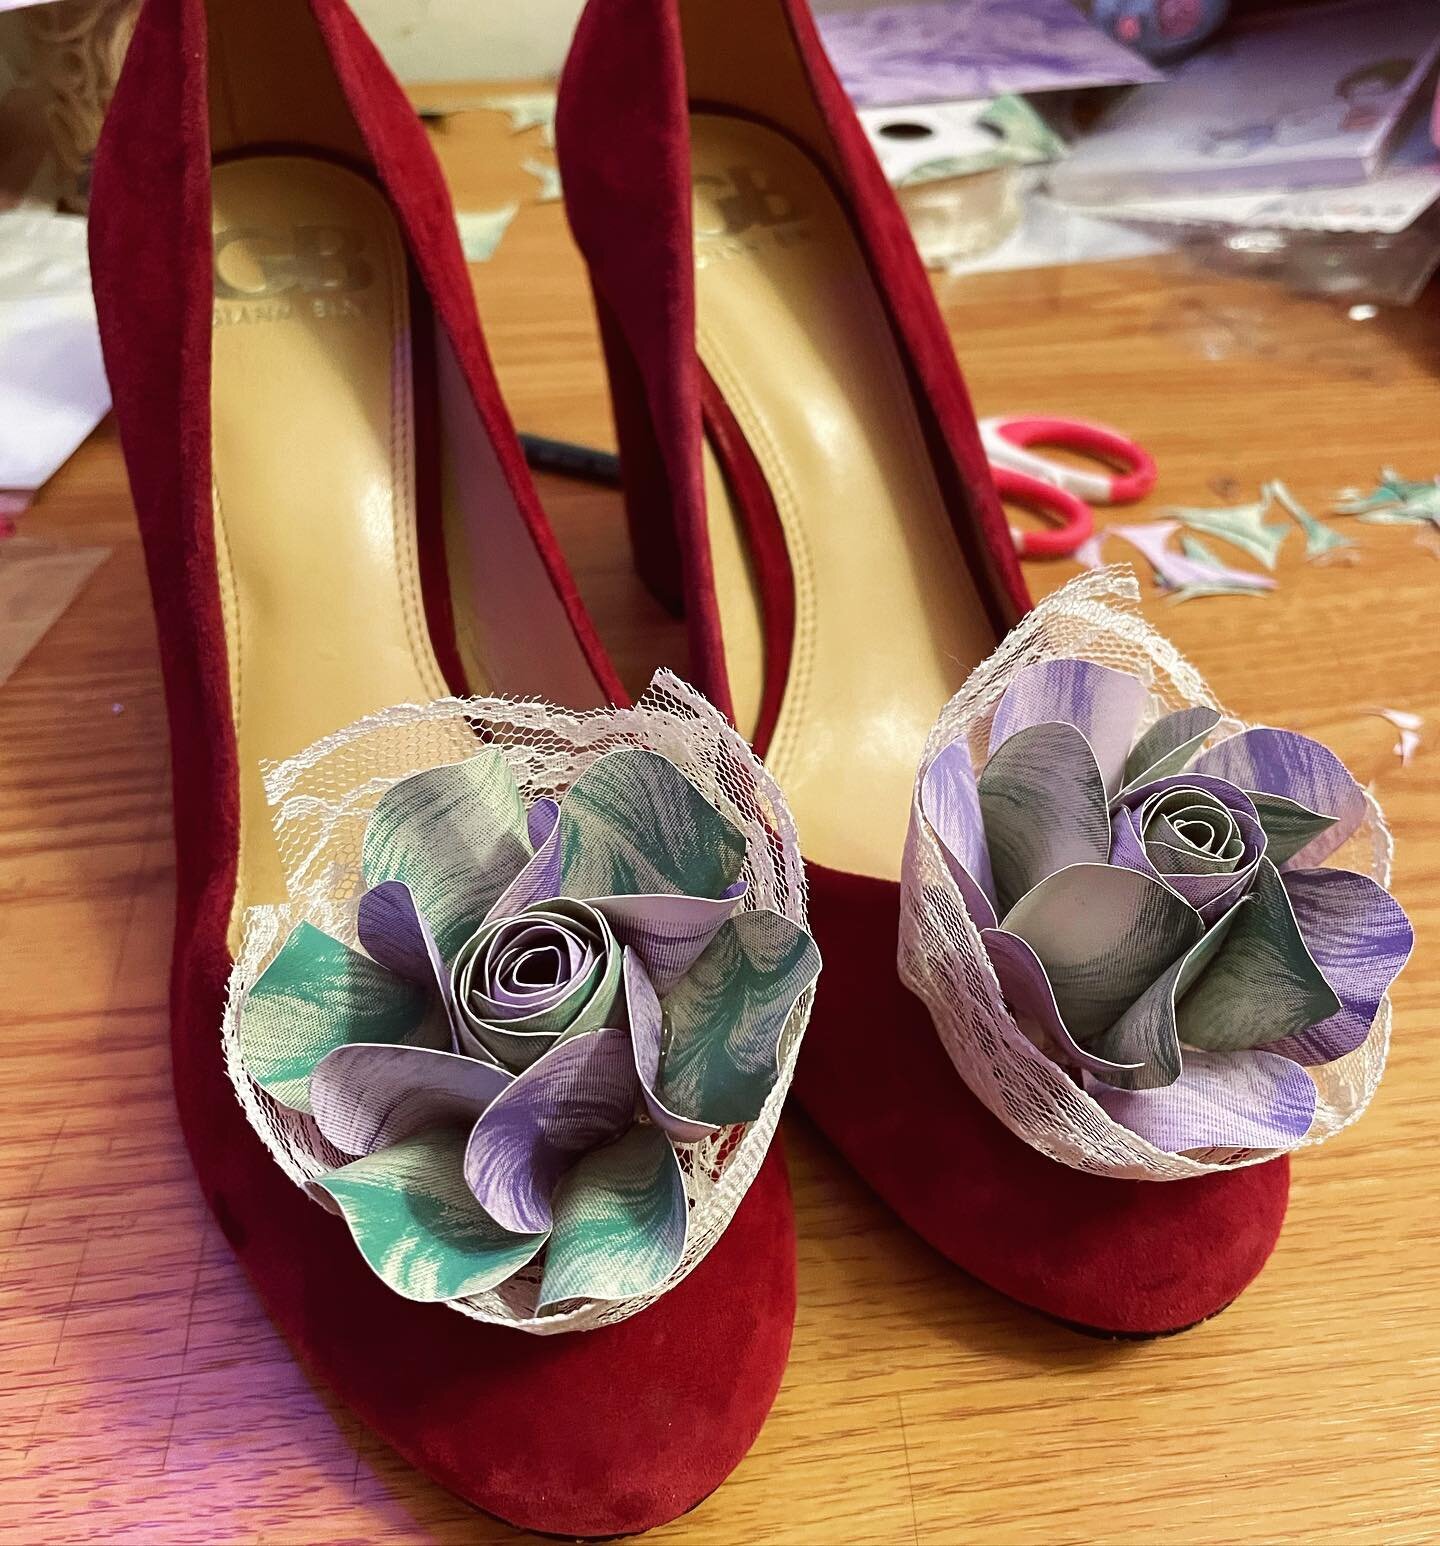 Added some of my screenprinted fluffy flowers to a pair of shoes to complete my ensemble for this weekend! 🥀🦋🌹

Doing this has spurred some ideas for some other projects. It&rsquo;s been a good break from my creative rut! 

#printmaking #print #co